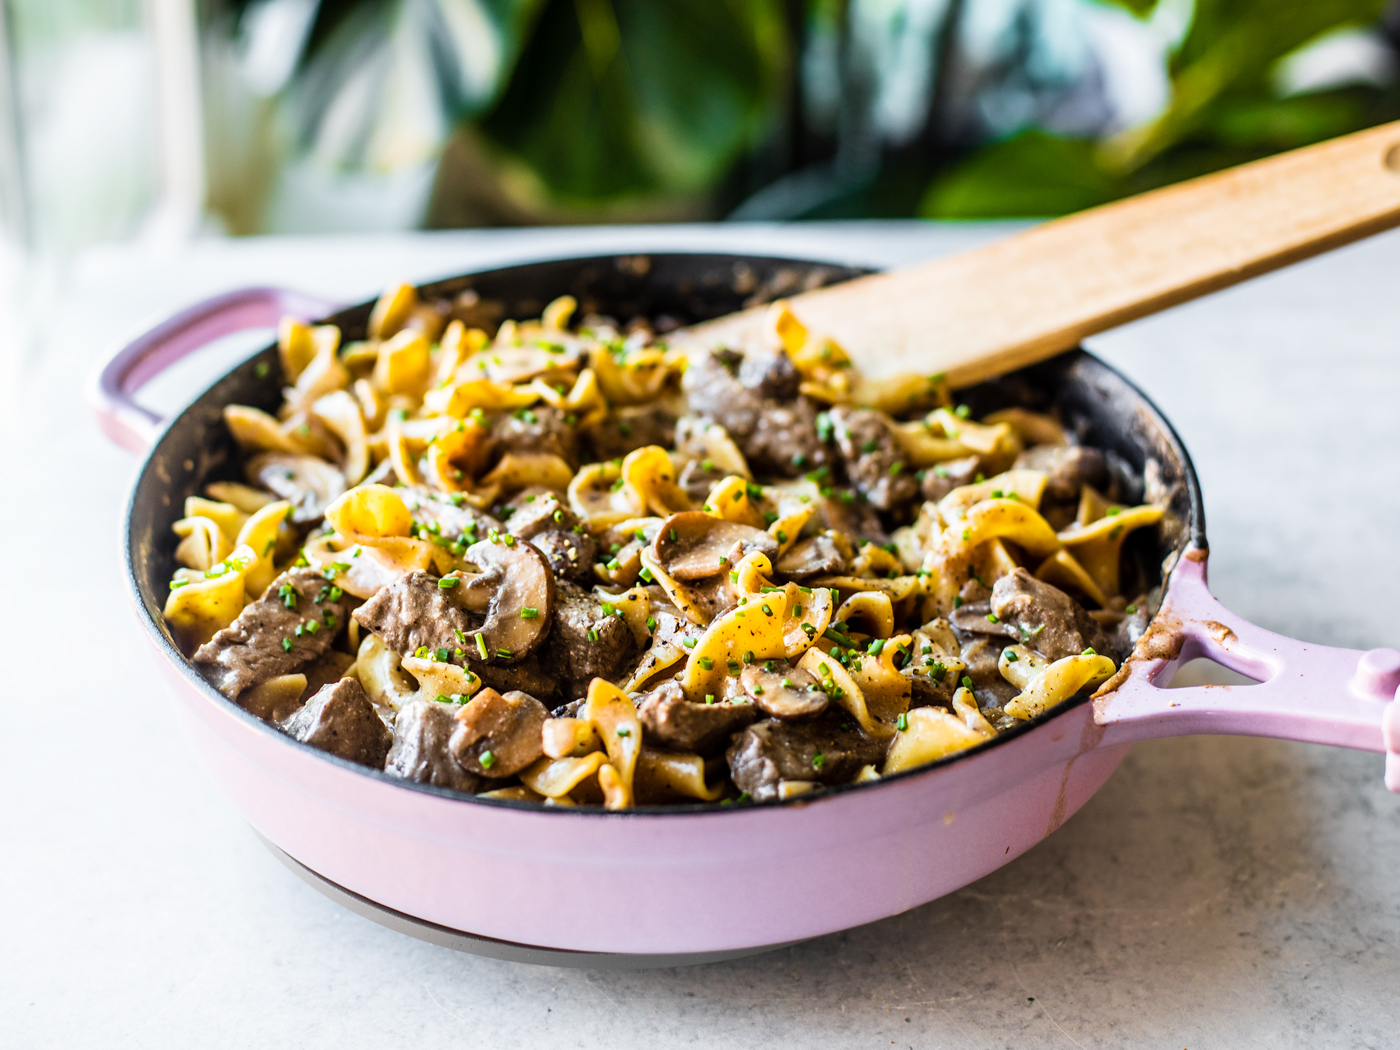 Purple skillet full of beef stroganoff and egg noodles, garnished with chives.